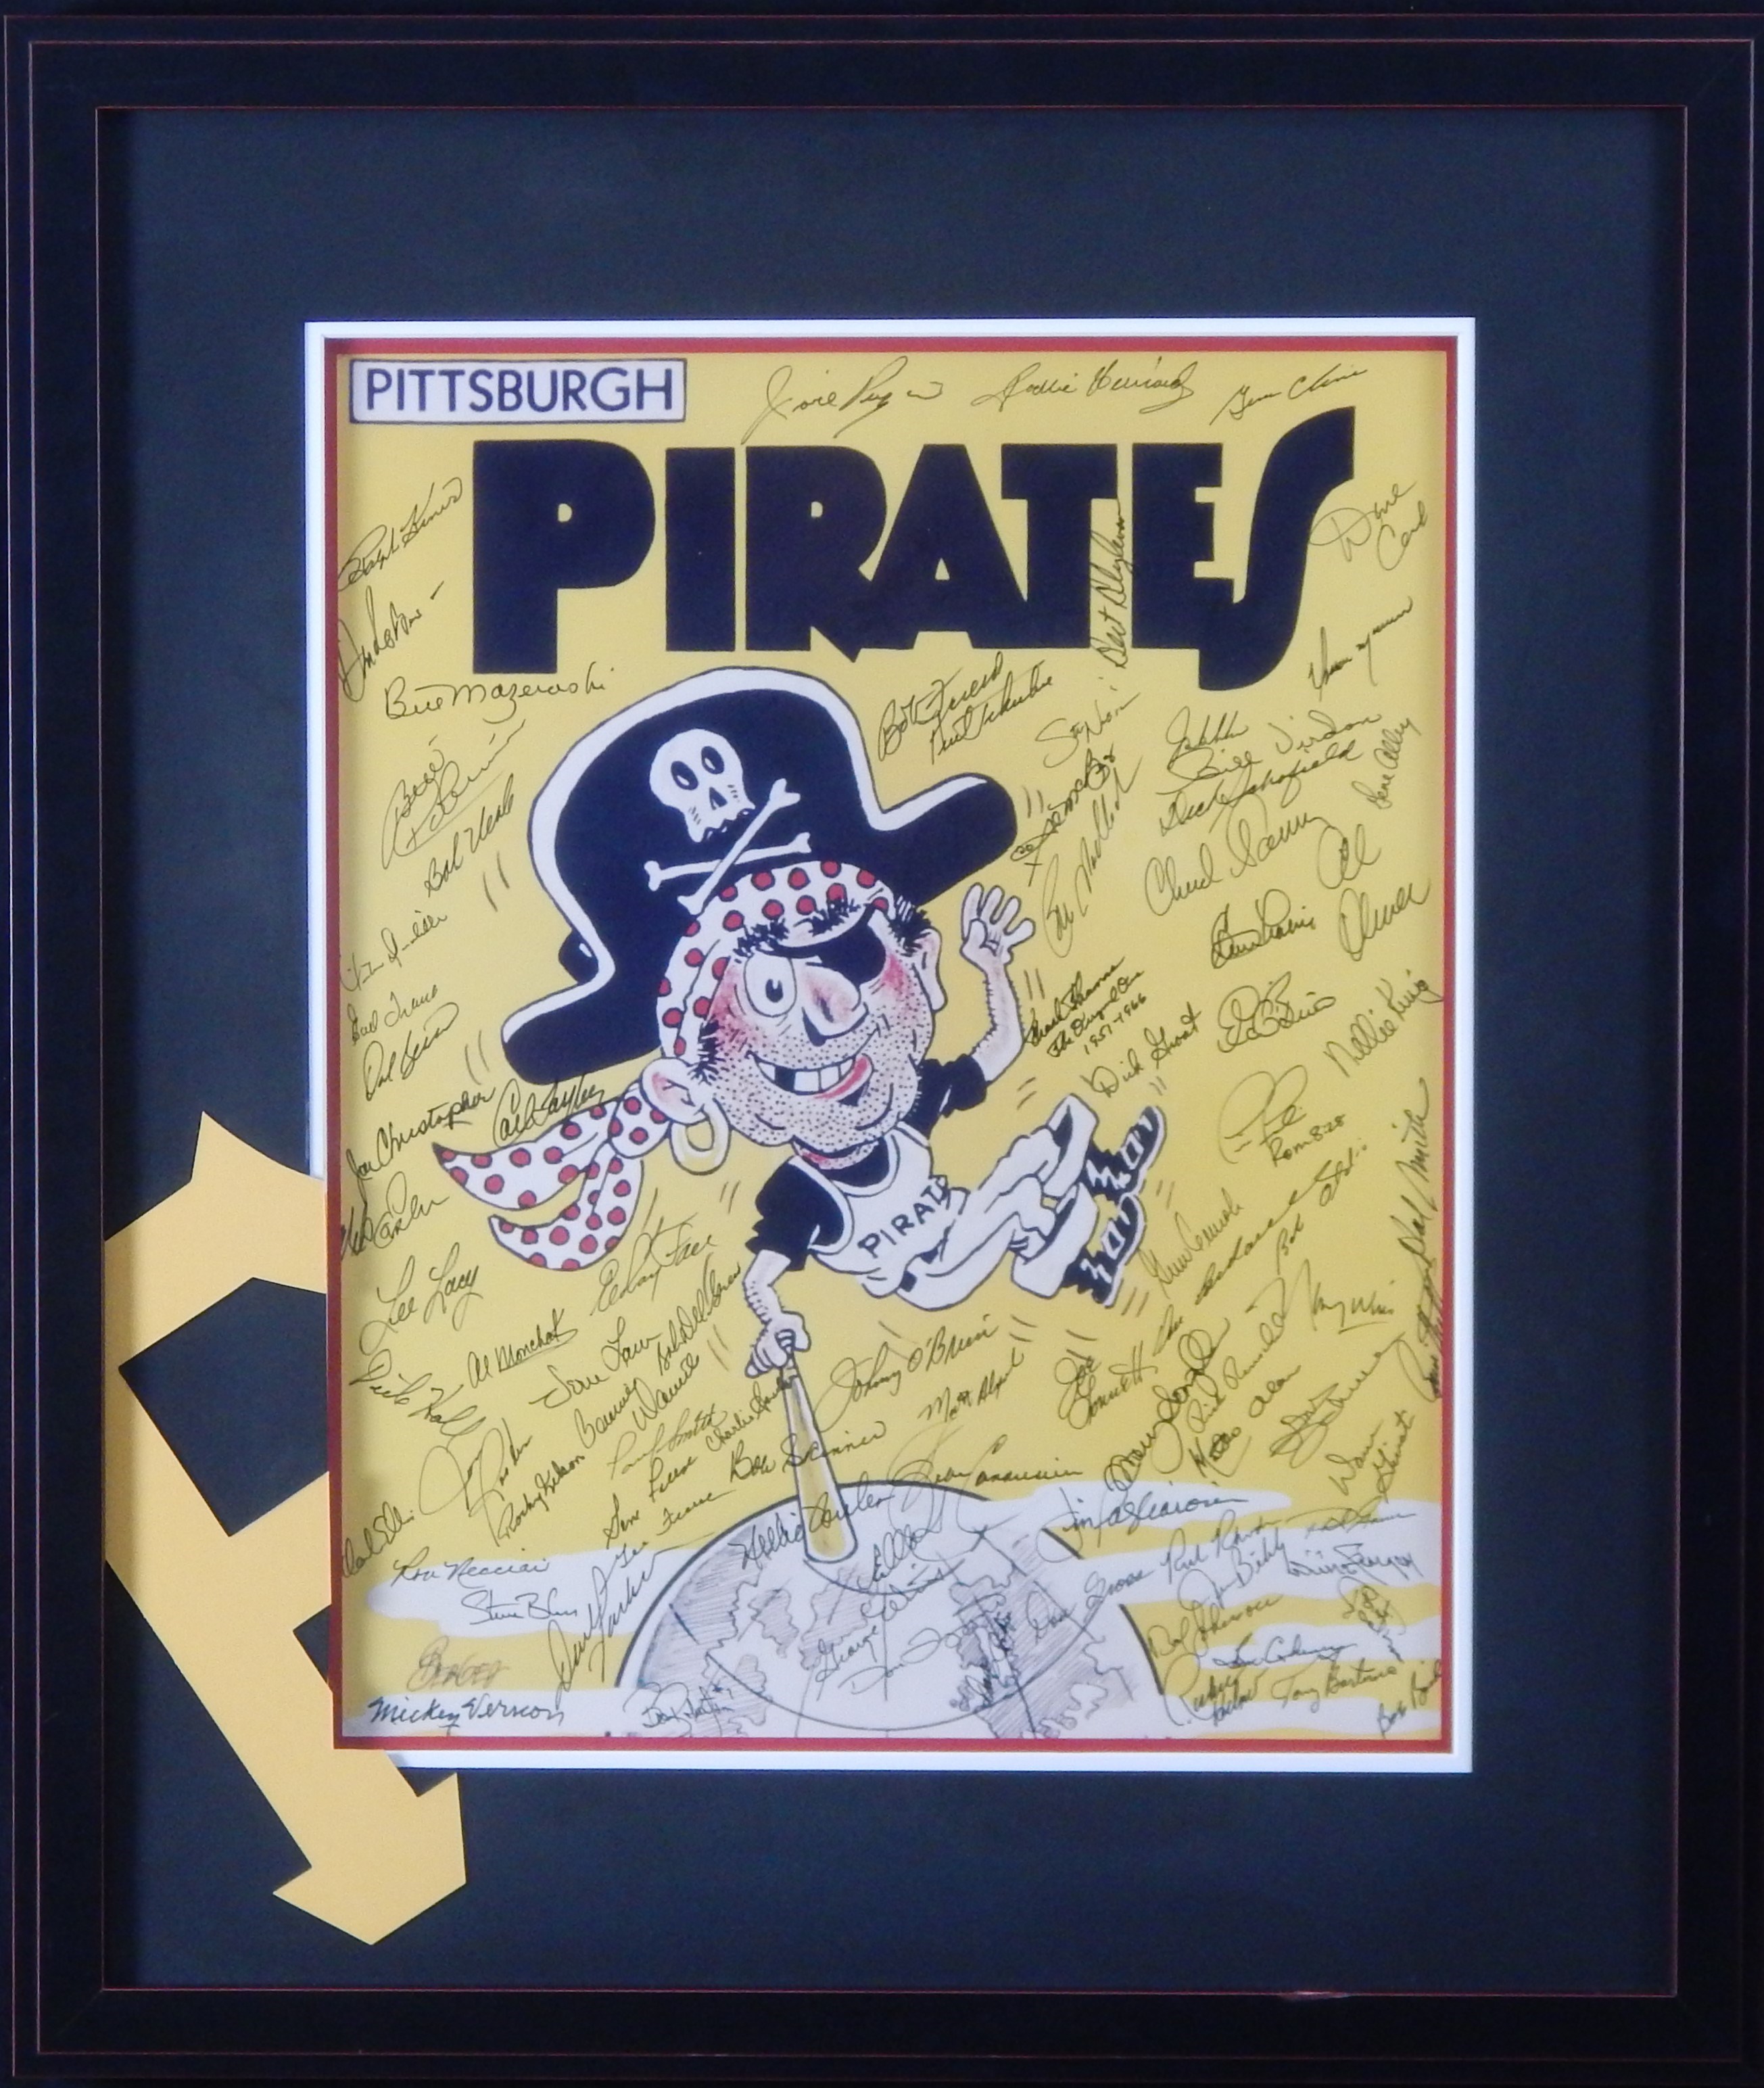 Baseball Autographs - Pittsburgh Pirates All-Time Greats Signed Print (80+ Signatures)